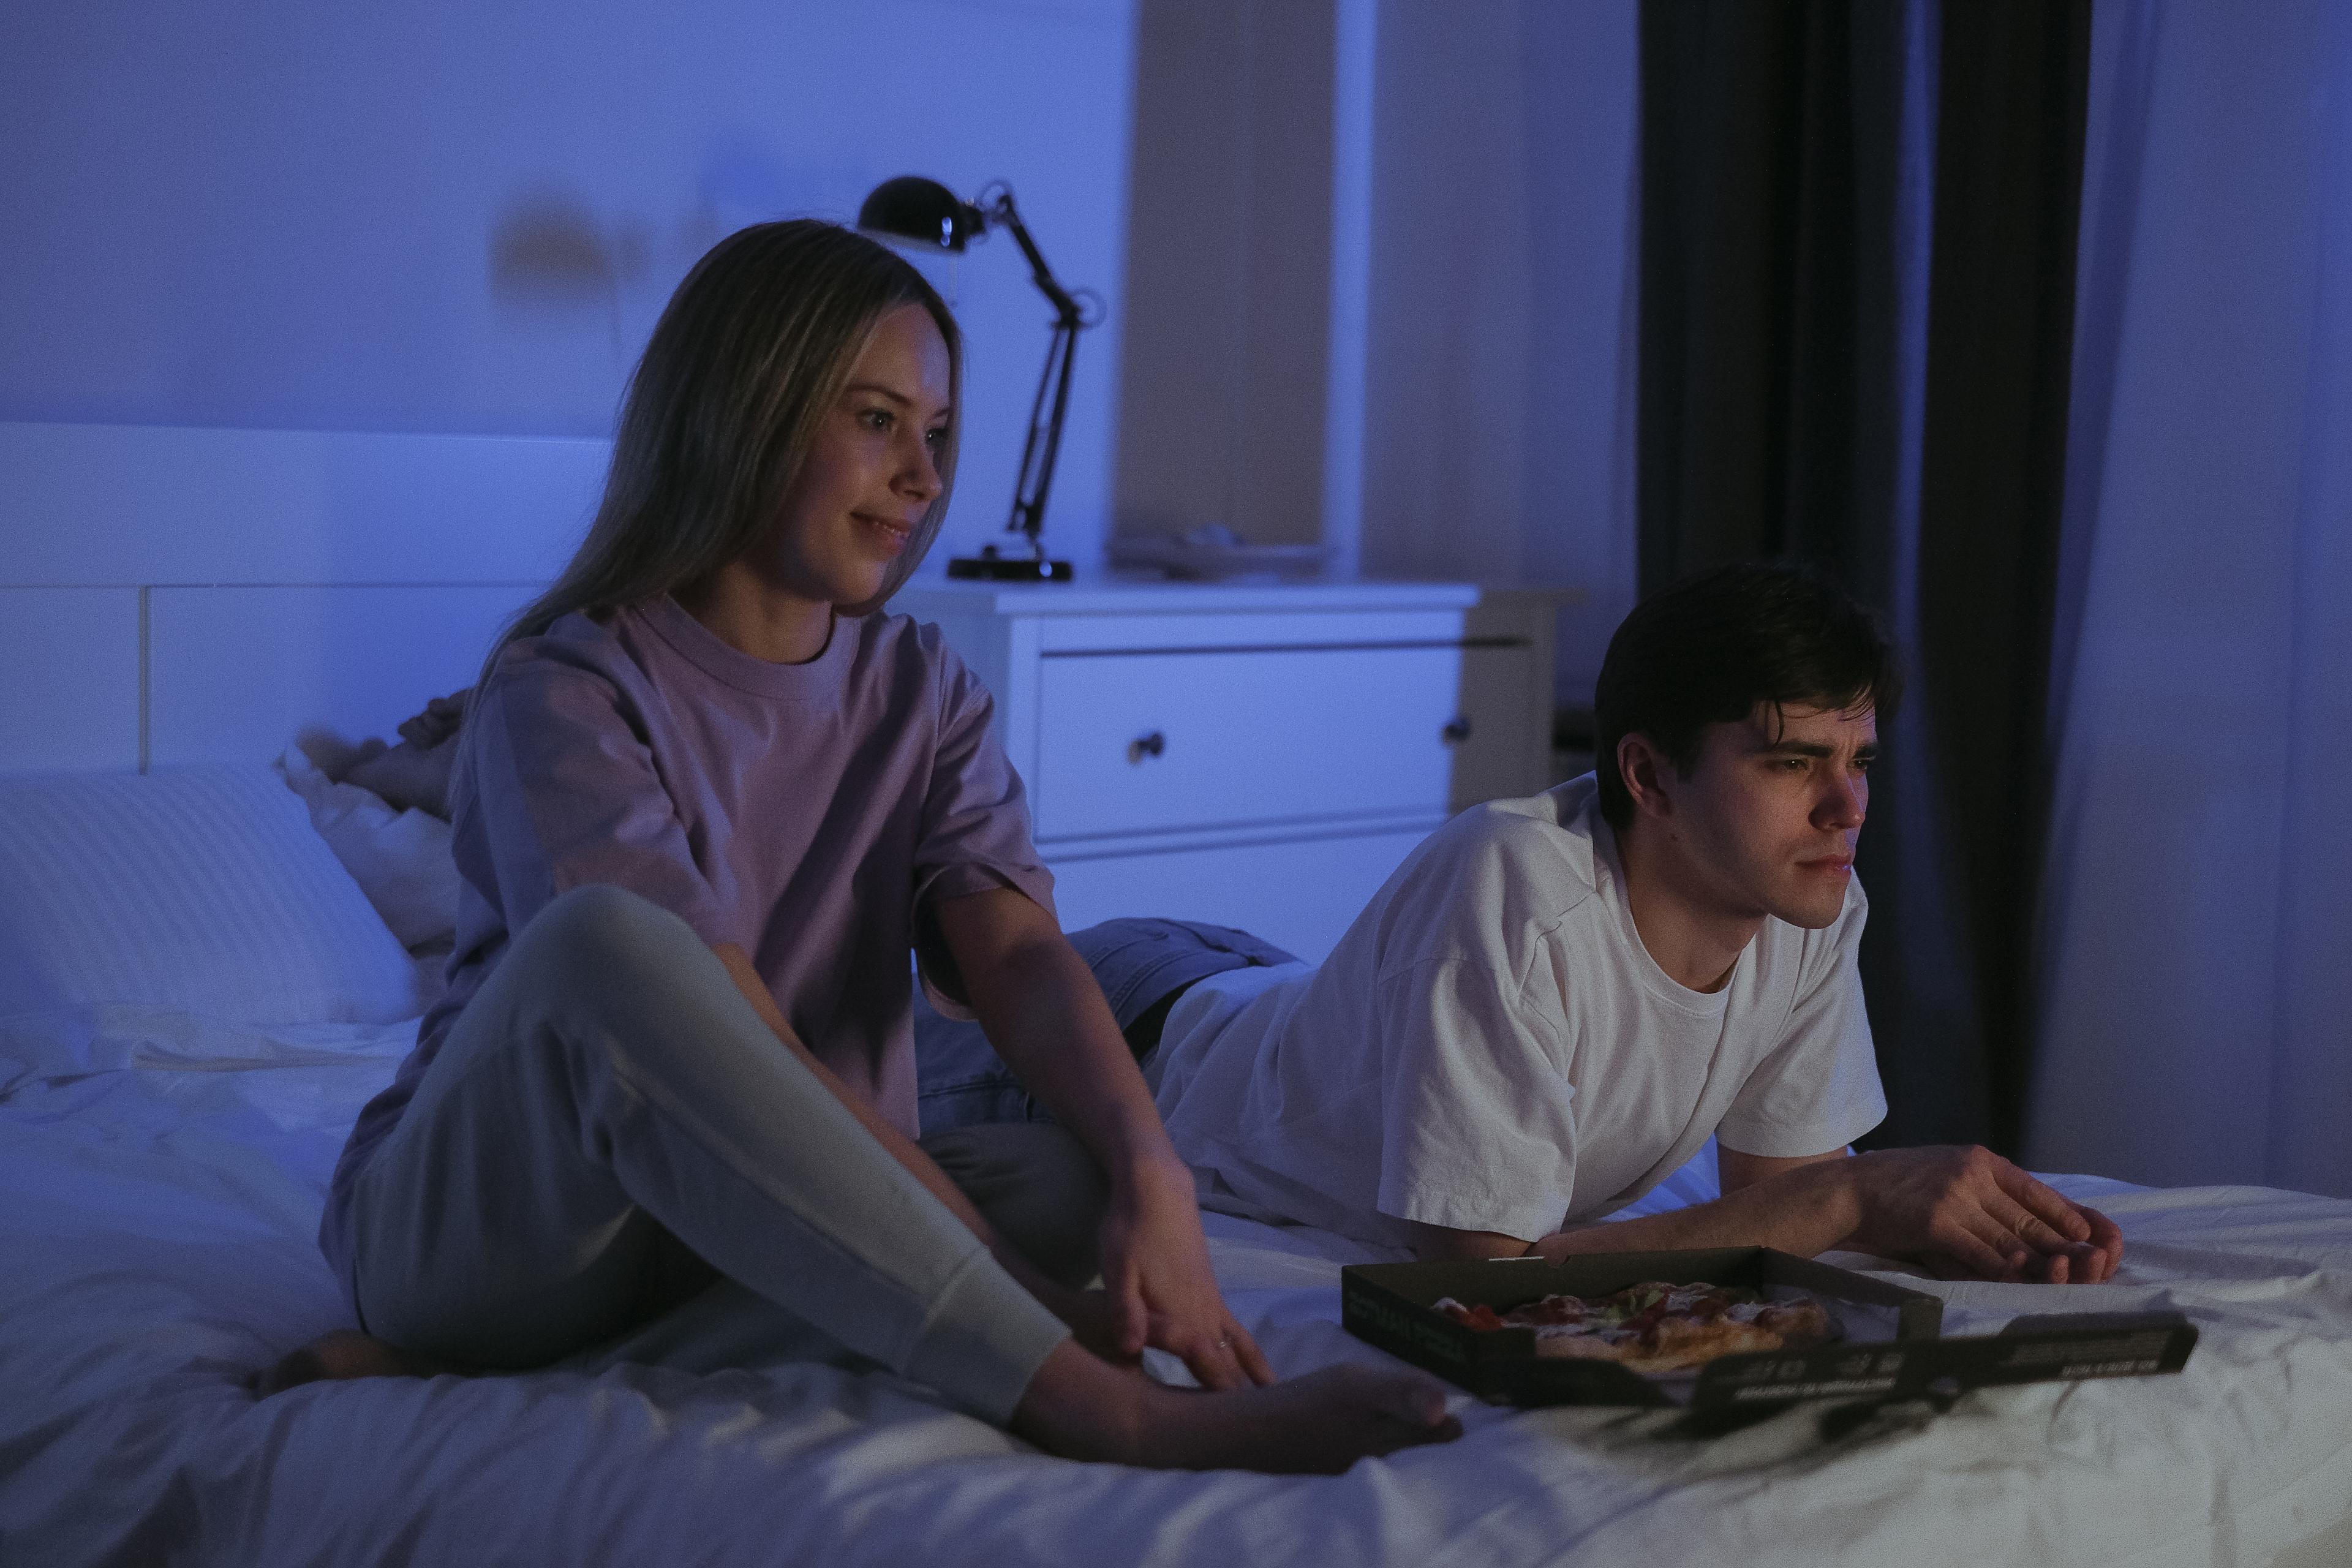 Couple watching TV on bed in bedroom